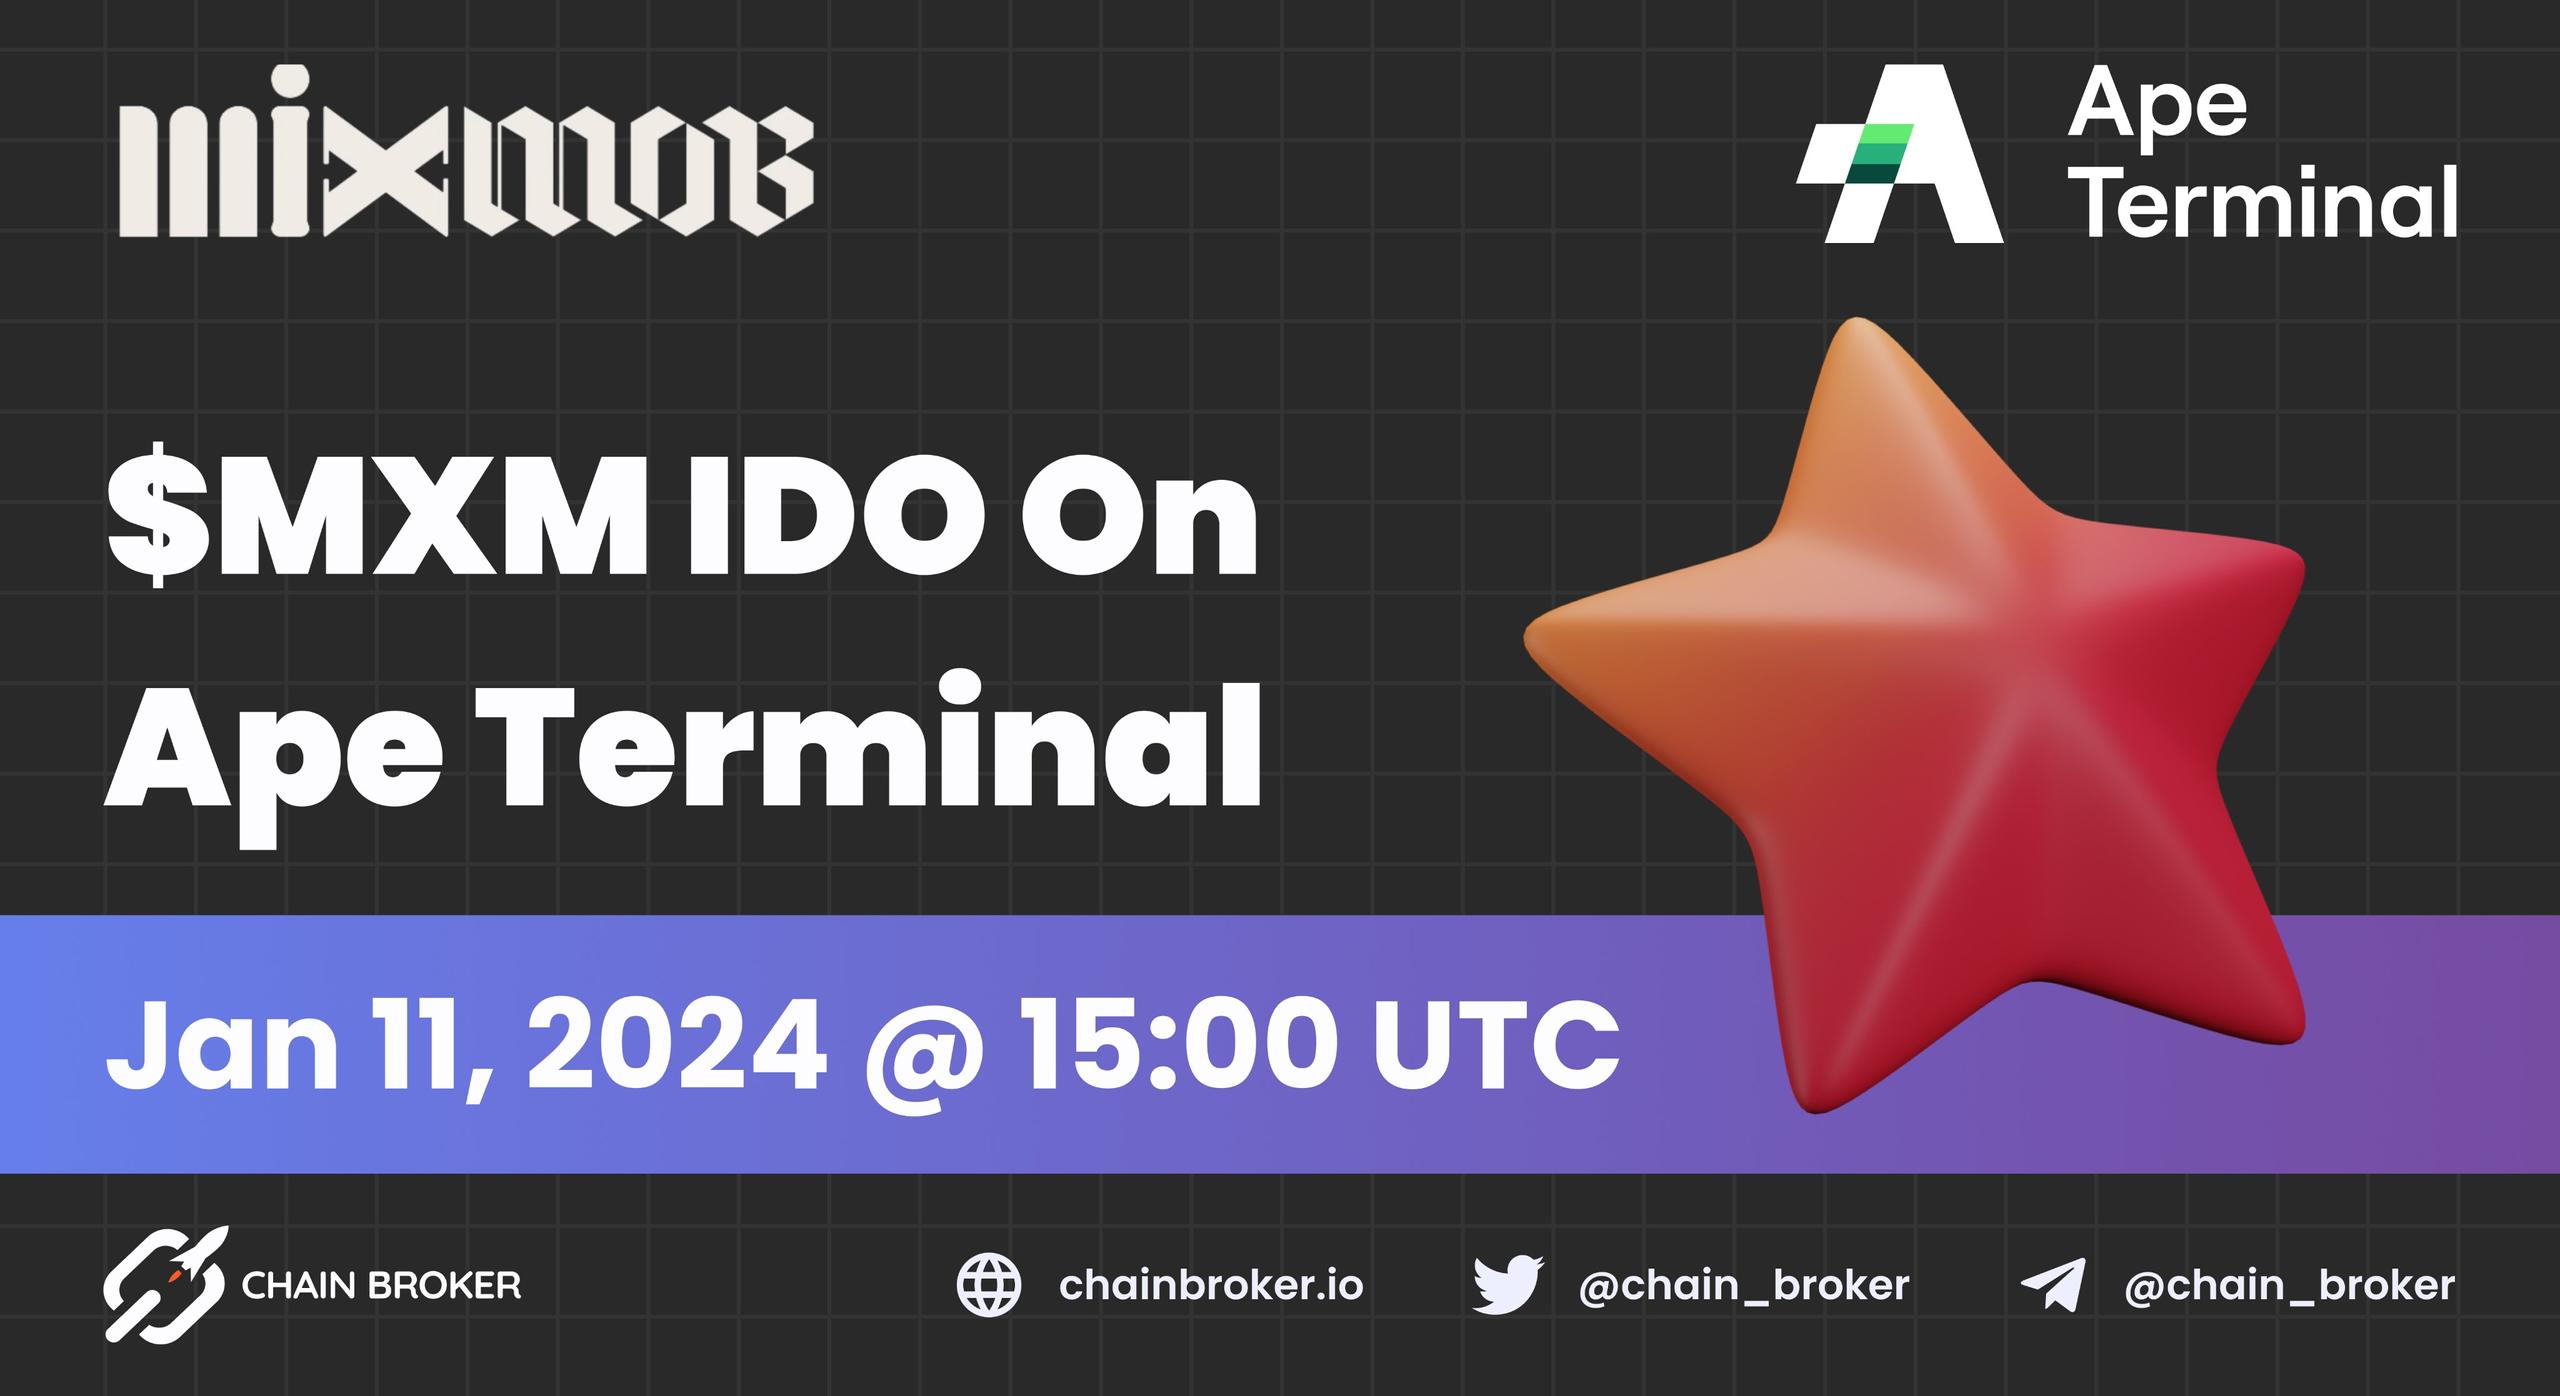 MixMob will launch IDO on Ape Terminal